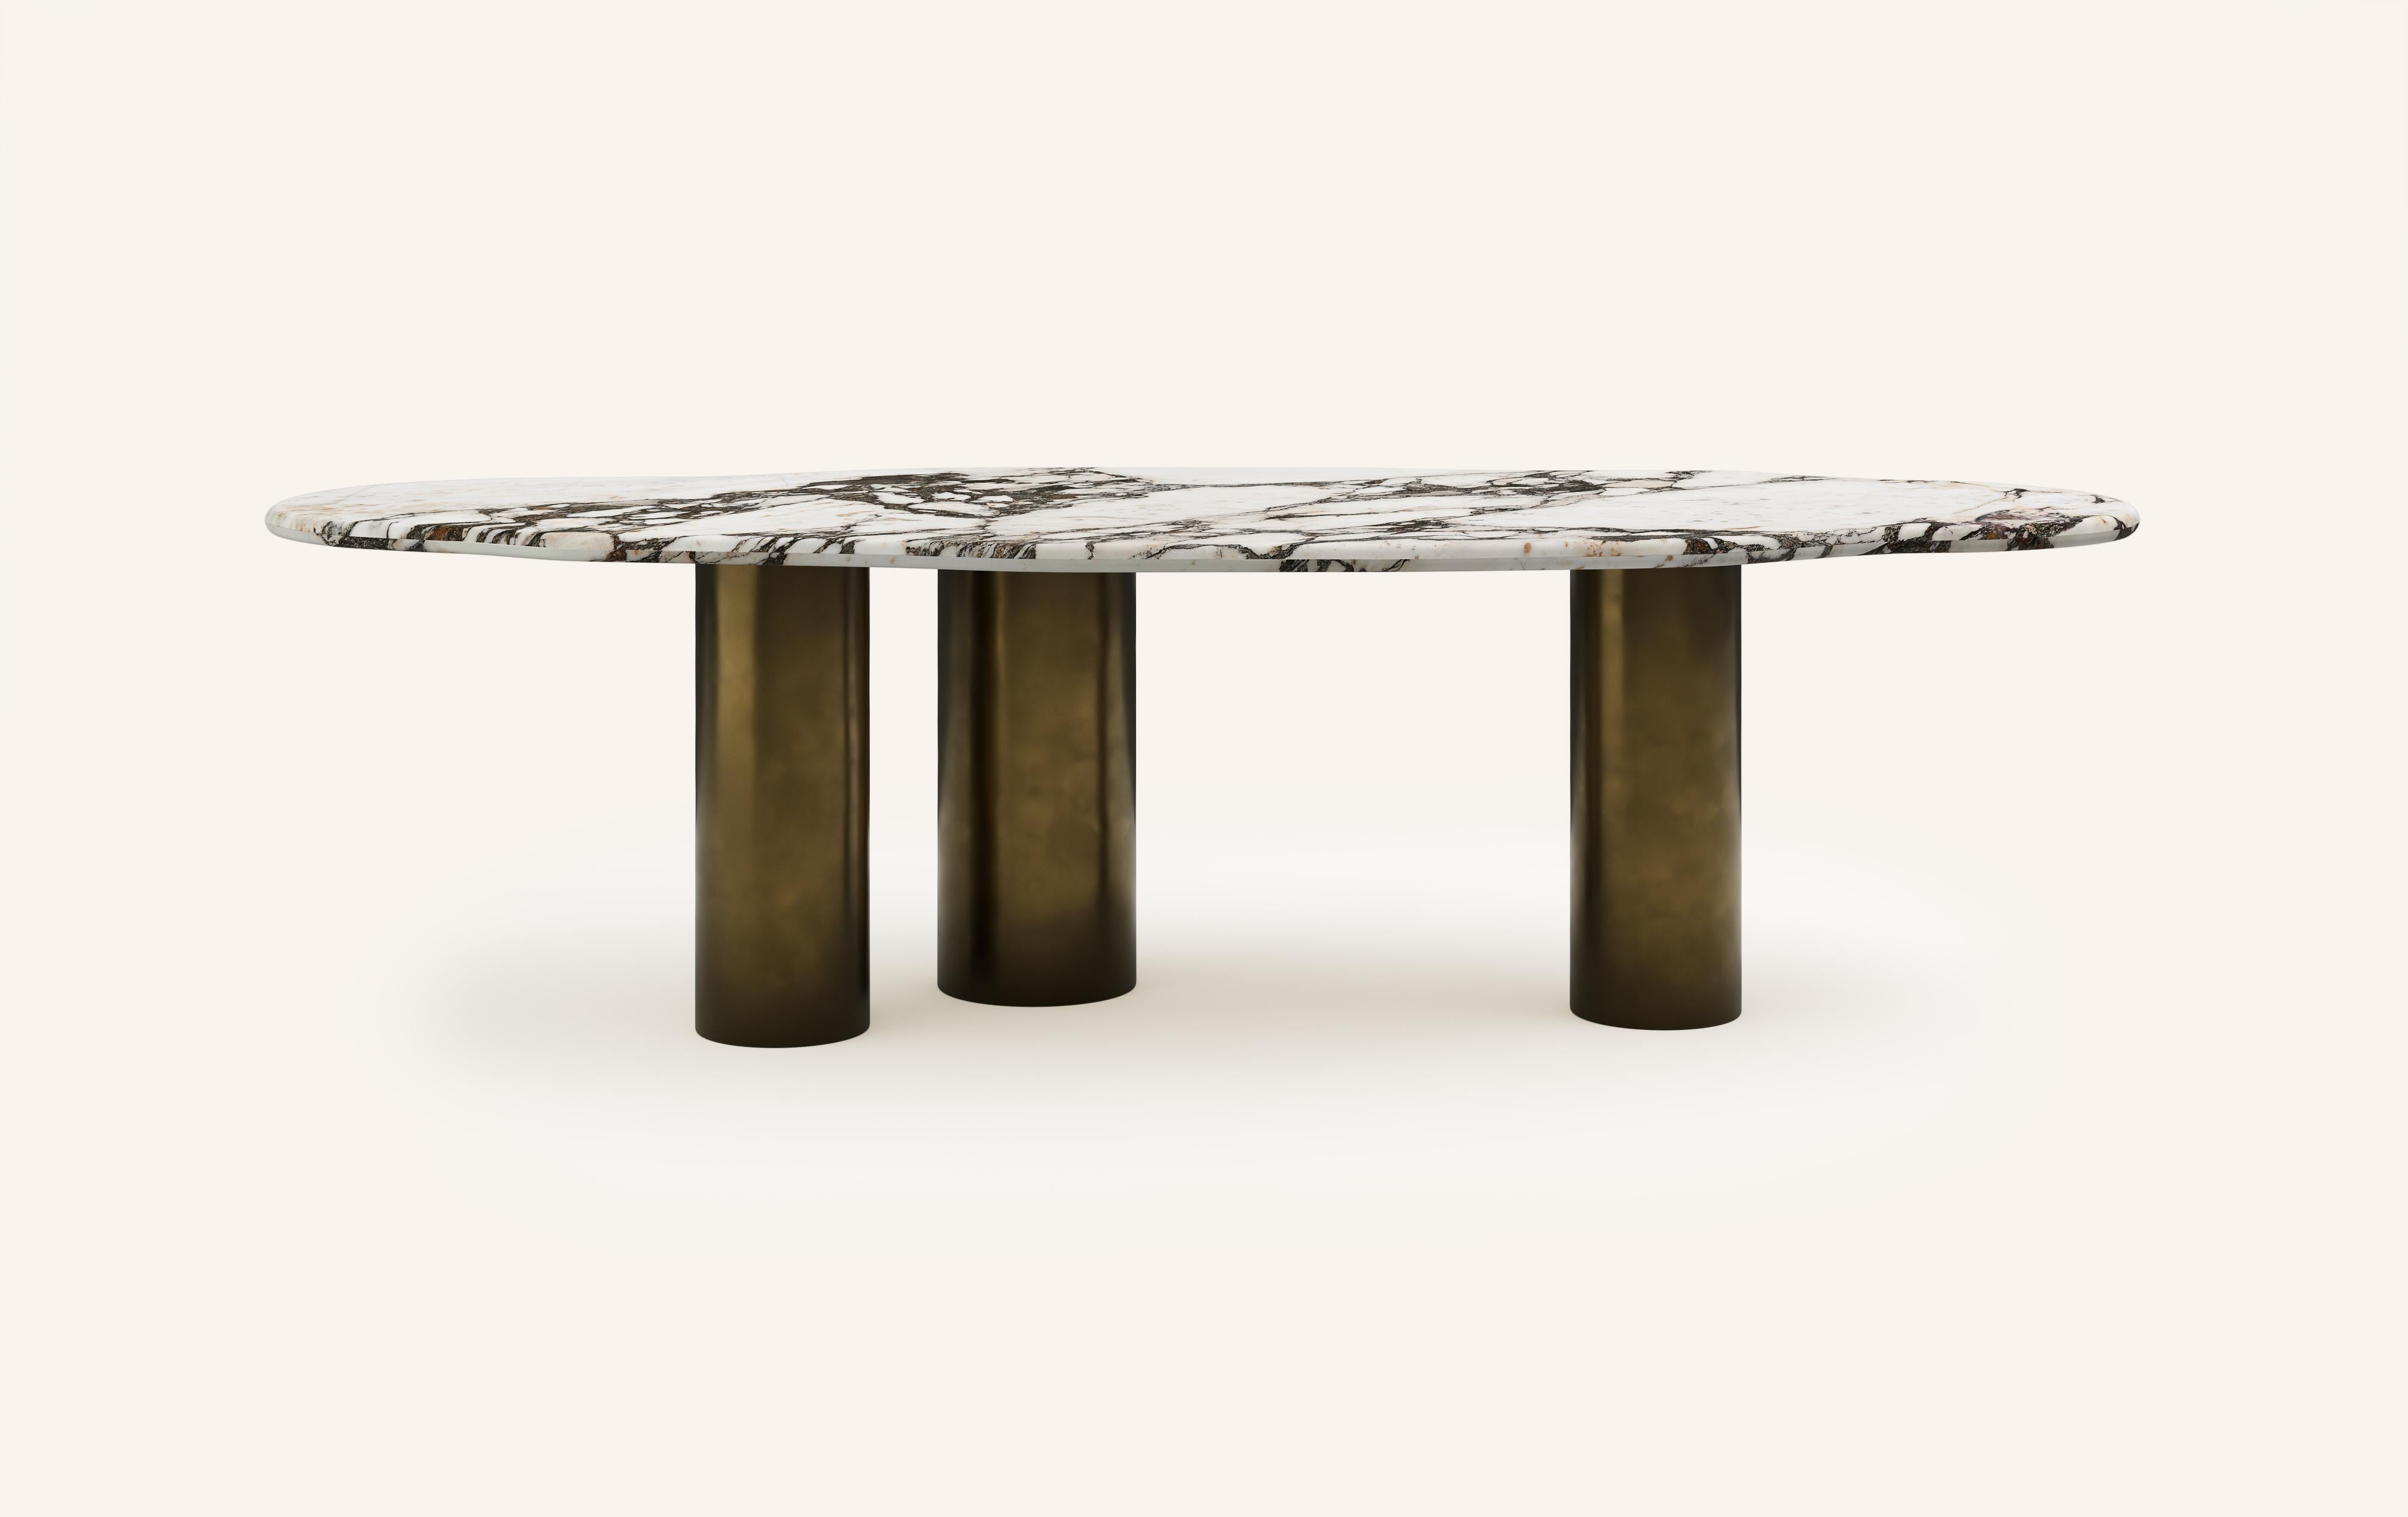 ‘LAGO’, ITALIAN FOR ‘LAKE’, HAS INSPIRED A FORM DERIVED FROM NATURE, TEXTURED WITH LUXURIOUS STONES AND METALS. THE COLLECTION ENCOURAGES NESTING AND LAYERING IN ITS AVAILABLE FORMS.

DIMENSIONS: 
118”L x 48”W x 30”H: 
- 3 x 10